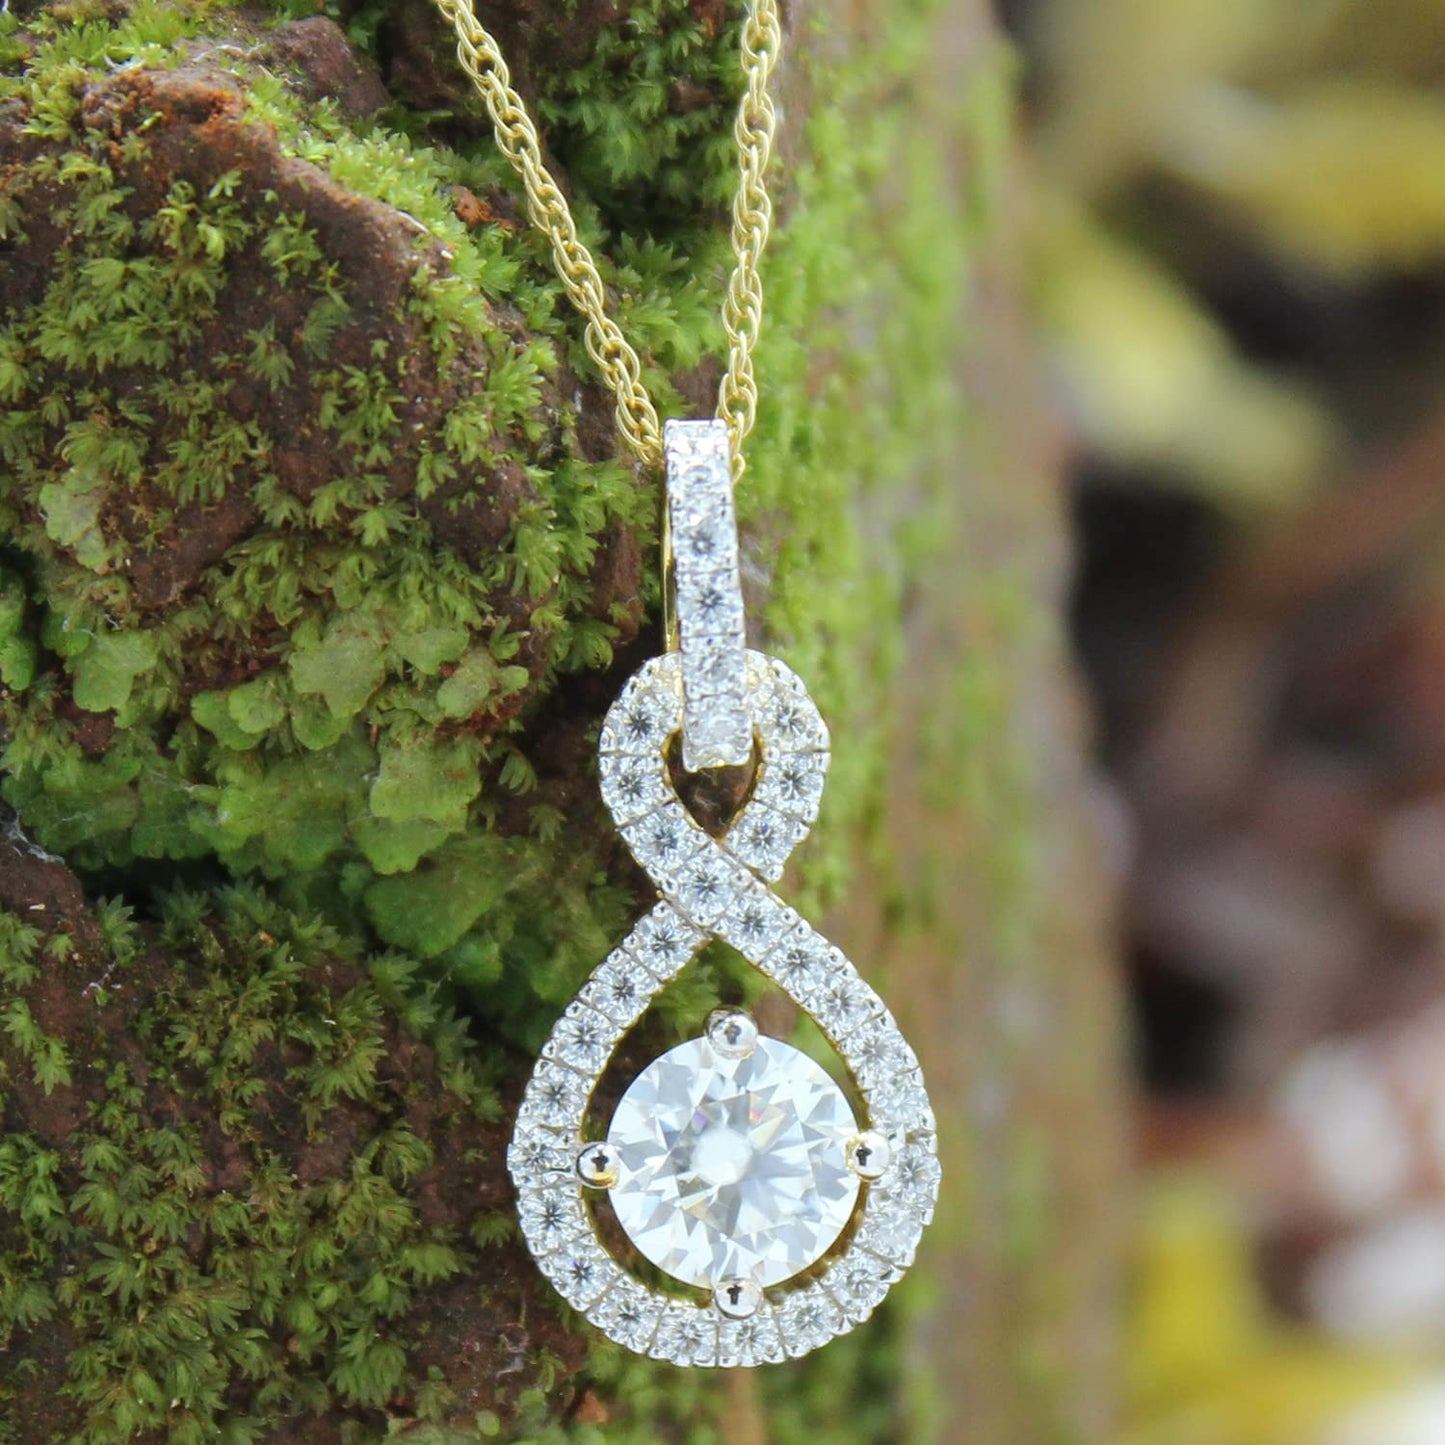 1 4/9 Carat Centre Stone 6.5MM Lab Created Moissanite Diamond Infinity Pendant Necklace In 925 Sterling Silver (1.45 Cttw)